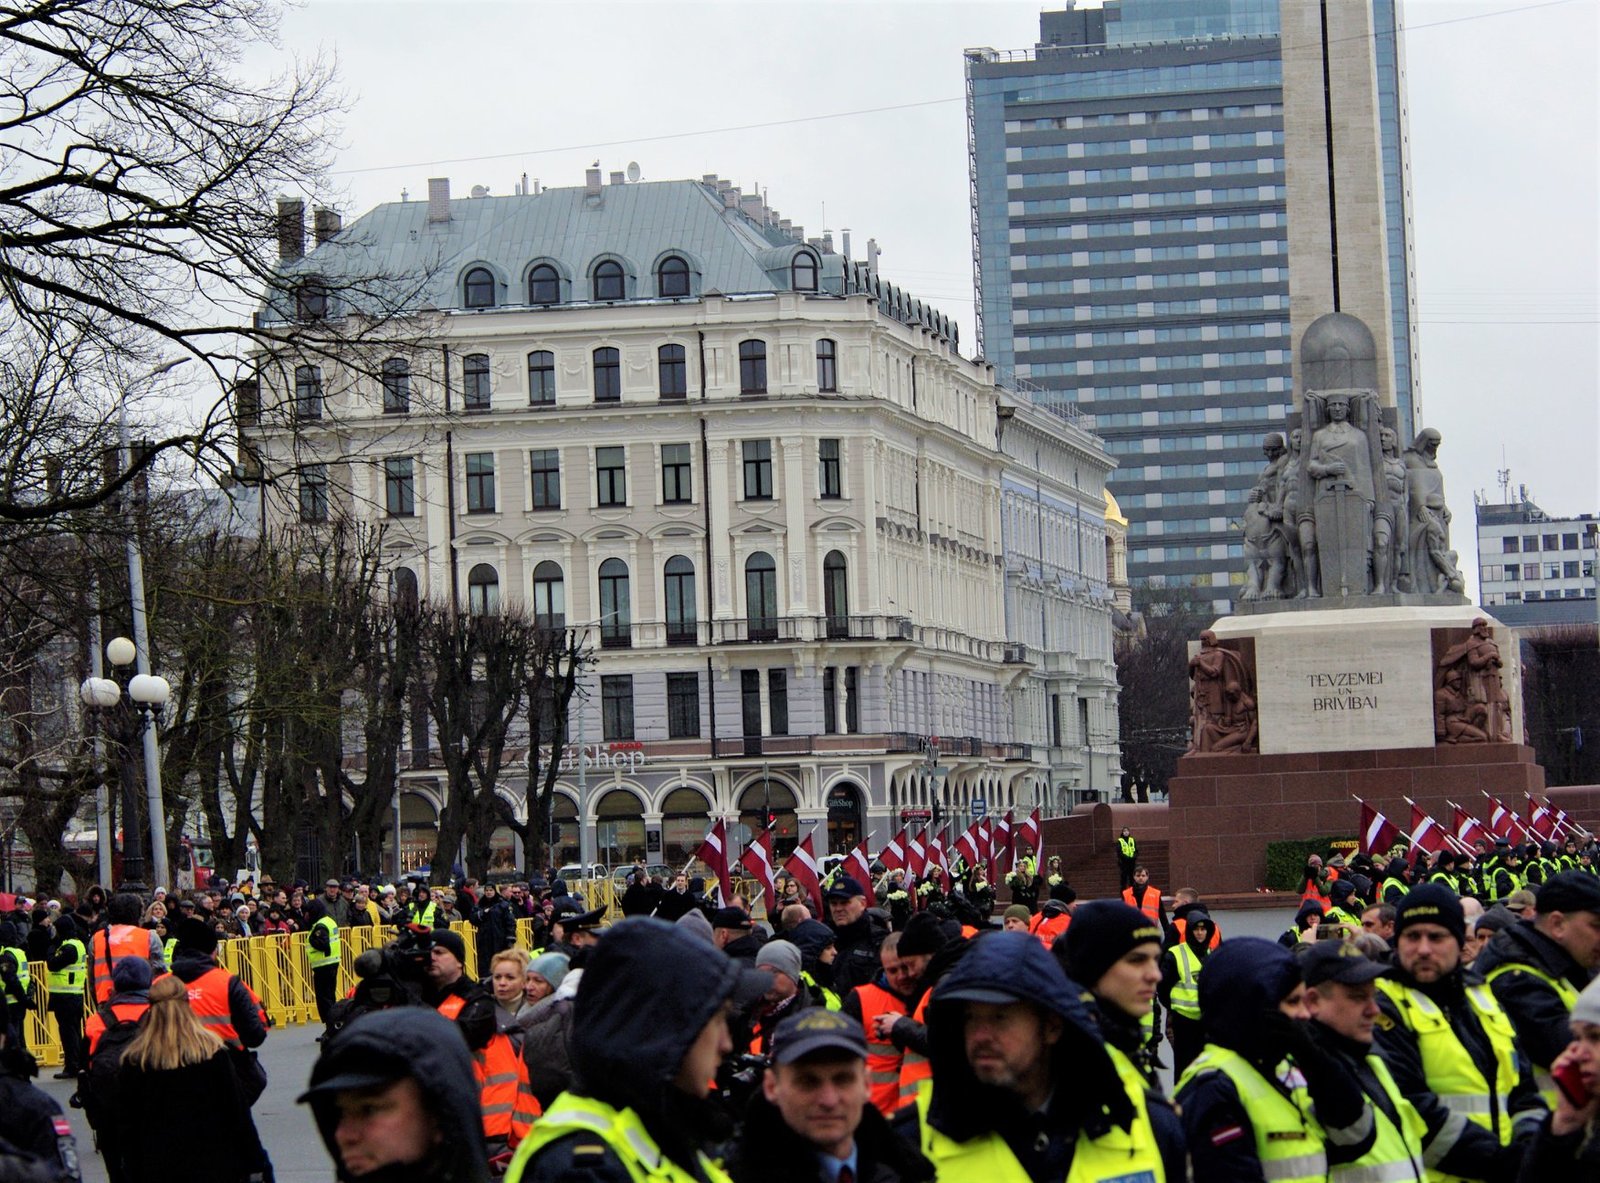 Another March 16, another procession of legionnaires - SS in the capital of Latvia. - Nazism, Baltics, Latvia, Estonia, Lithuania, Collaborationism, Longpost, Politics